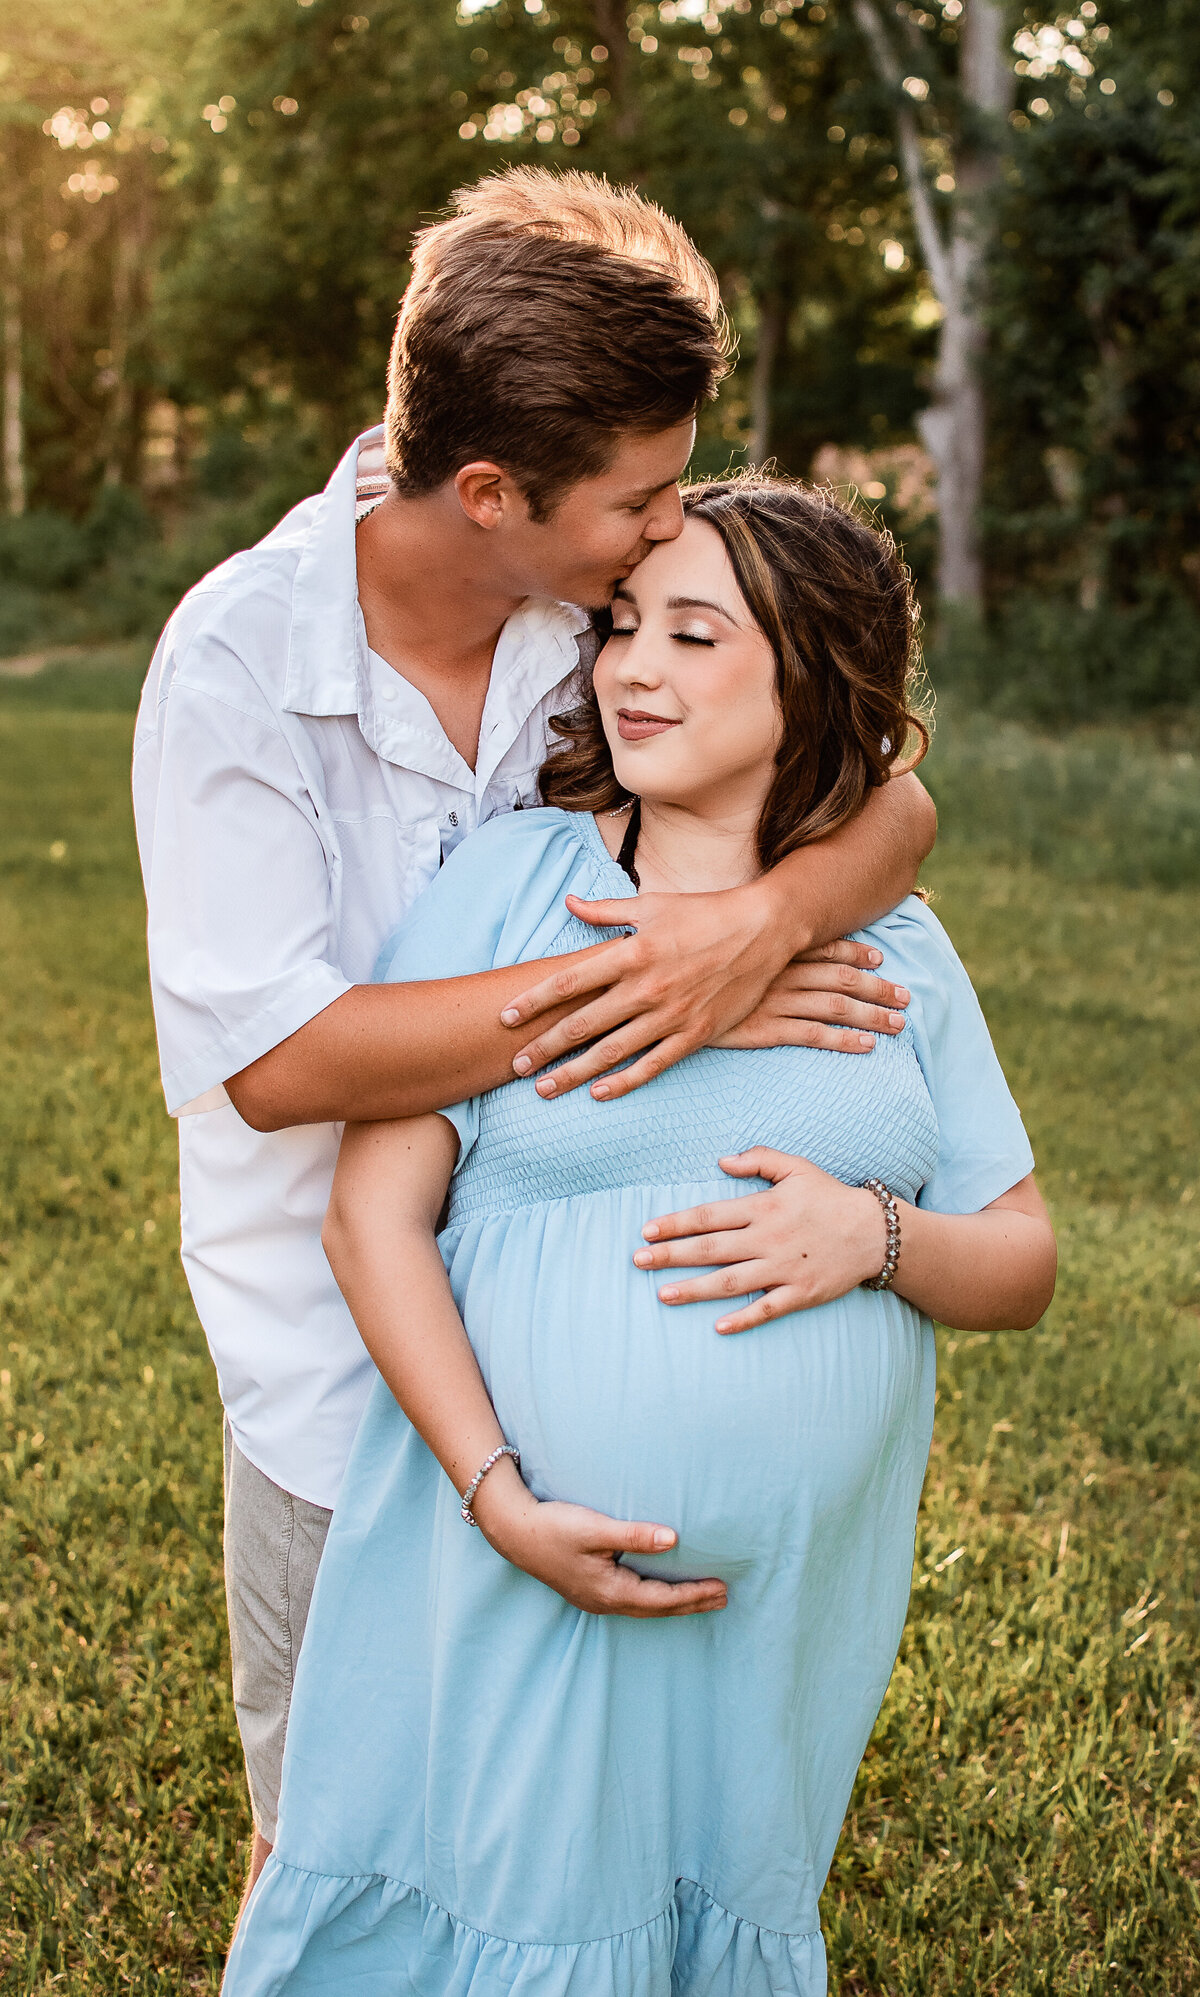 An expectant dad hugs his pregnant girlfriend around the neck while she touches her belly.